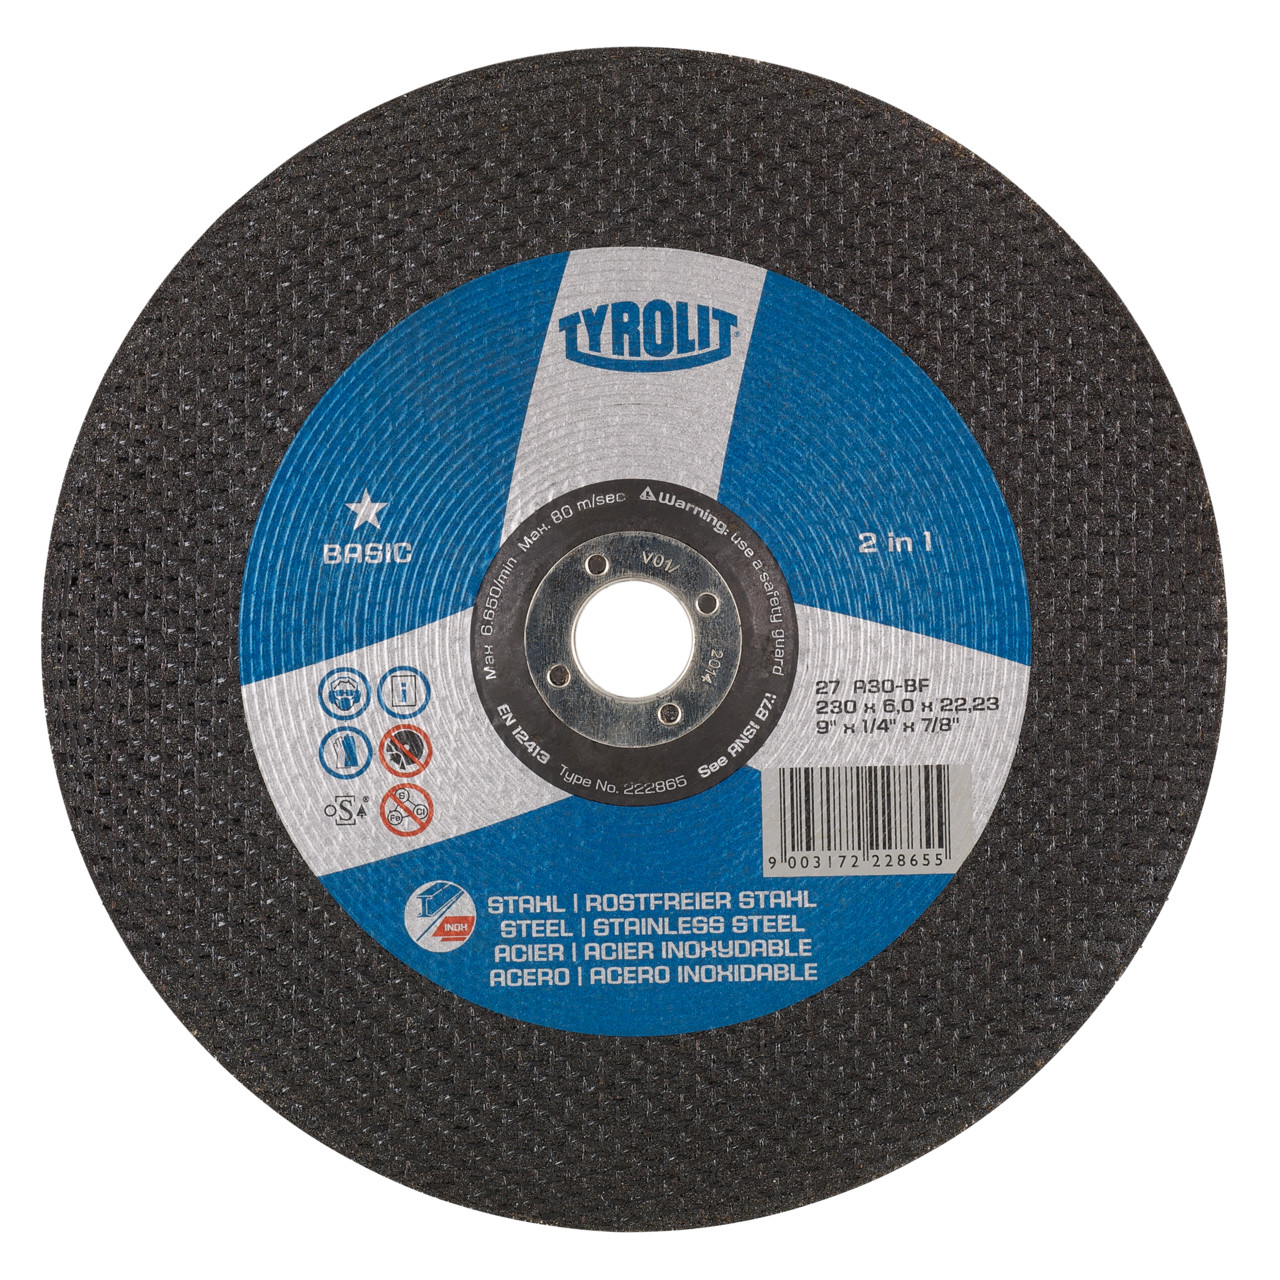 TYROLIT grinding wheel DxUxH 230x4.3x22.23 2in1 for steel and stainless steel, shape: 27 - offset version, Art. 34257206